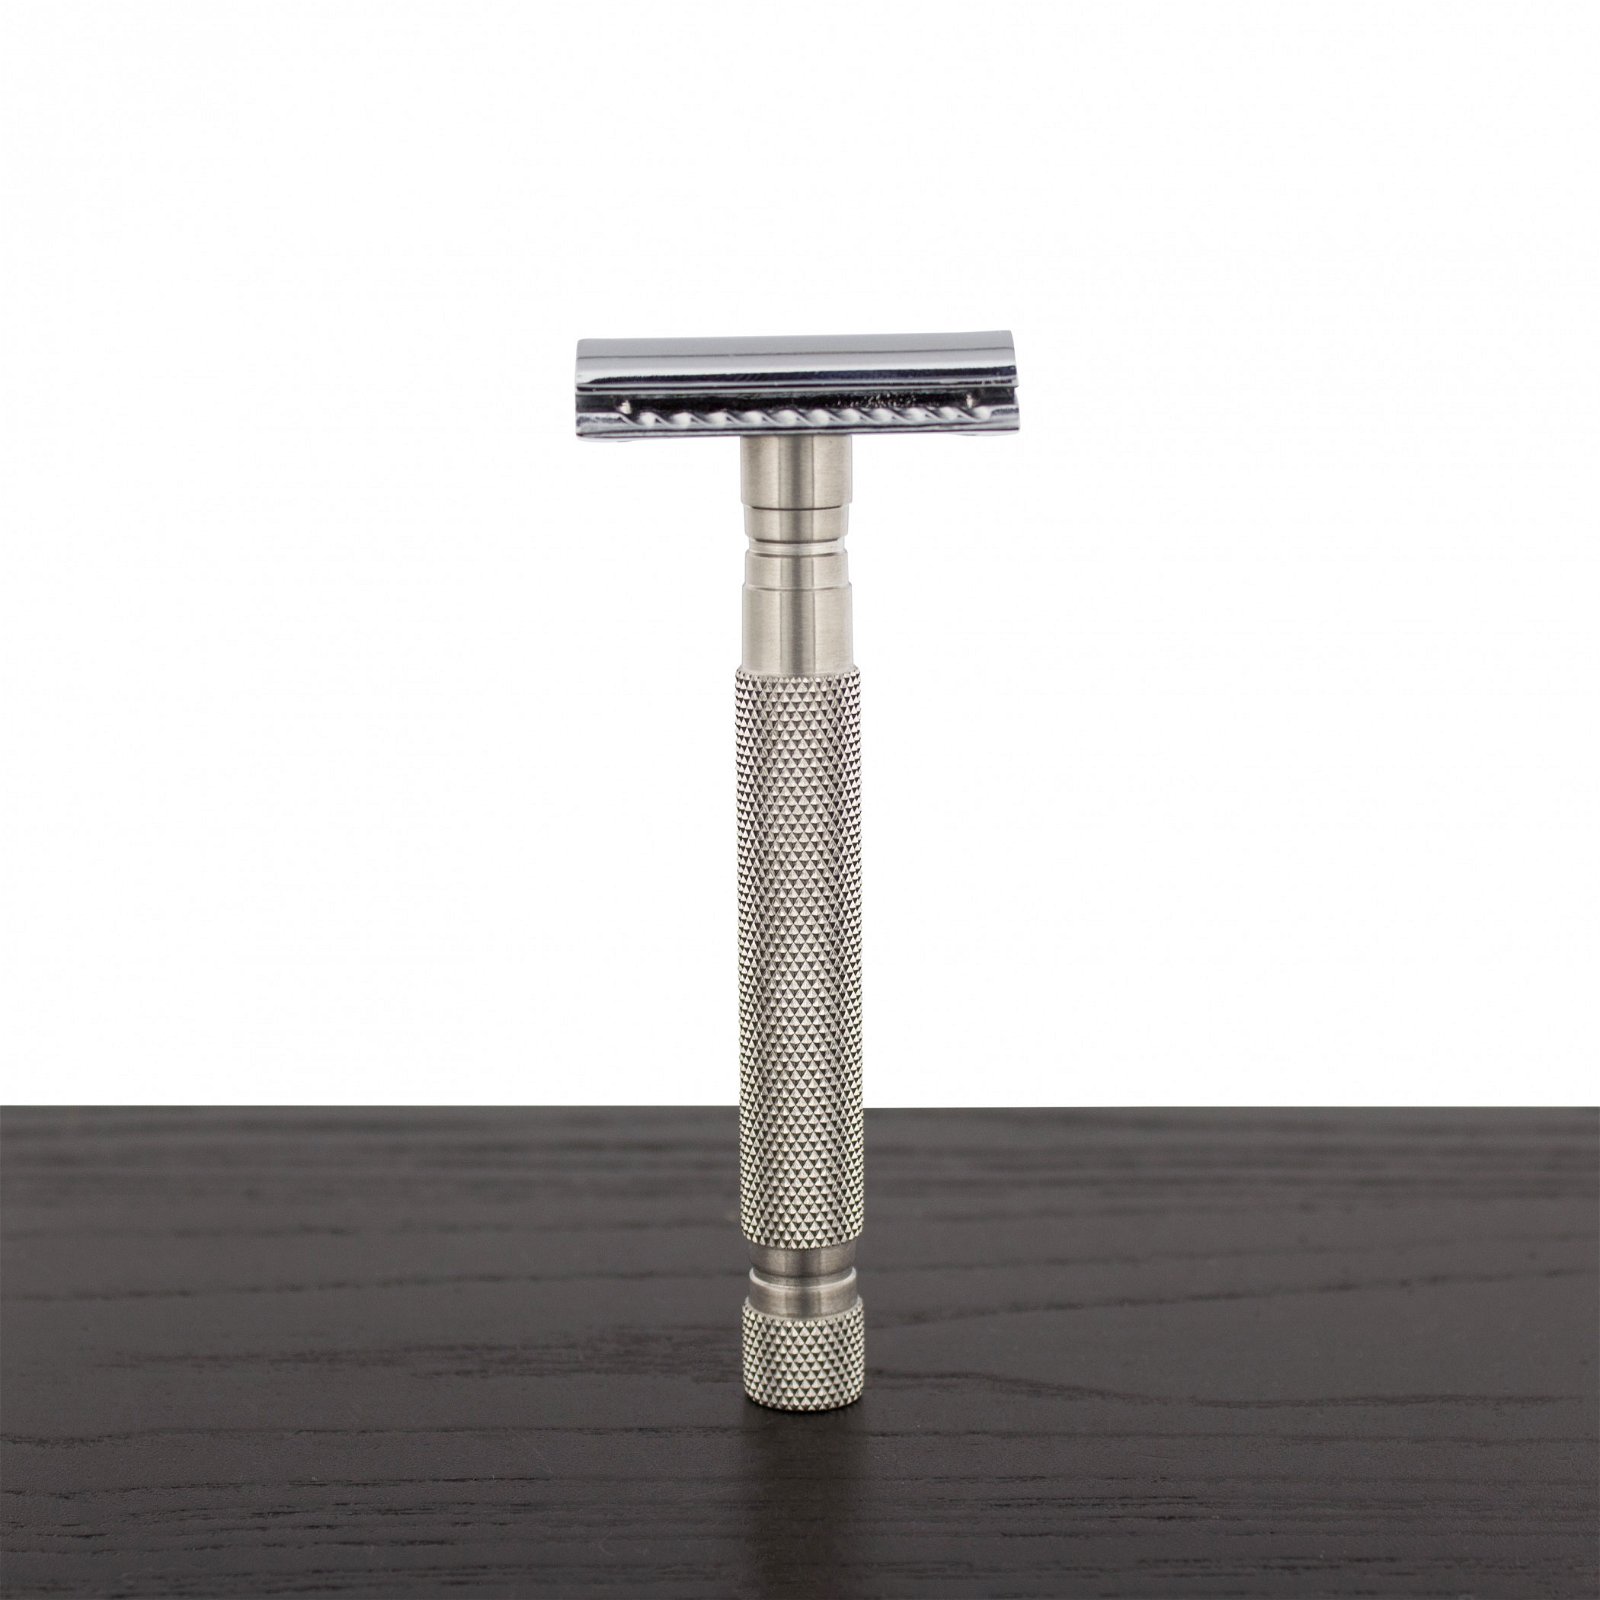 Image of WCS Classic Collection Razor 78S, Stainless Steel